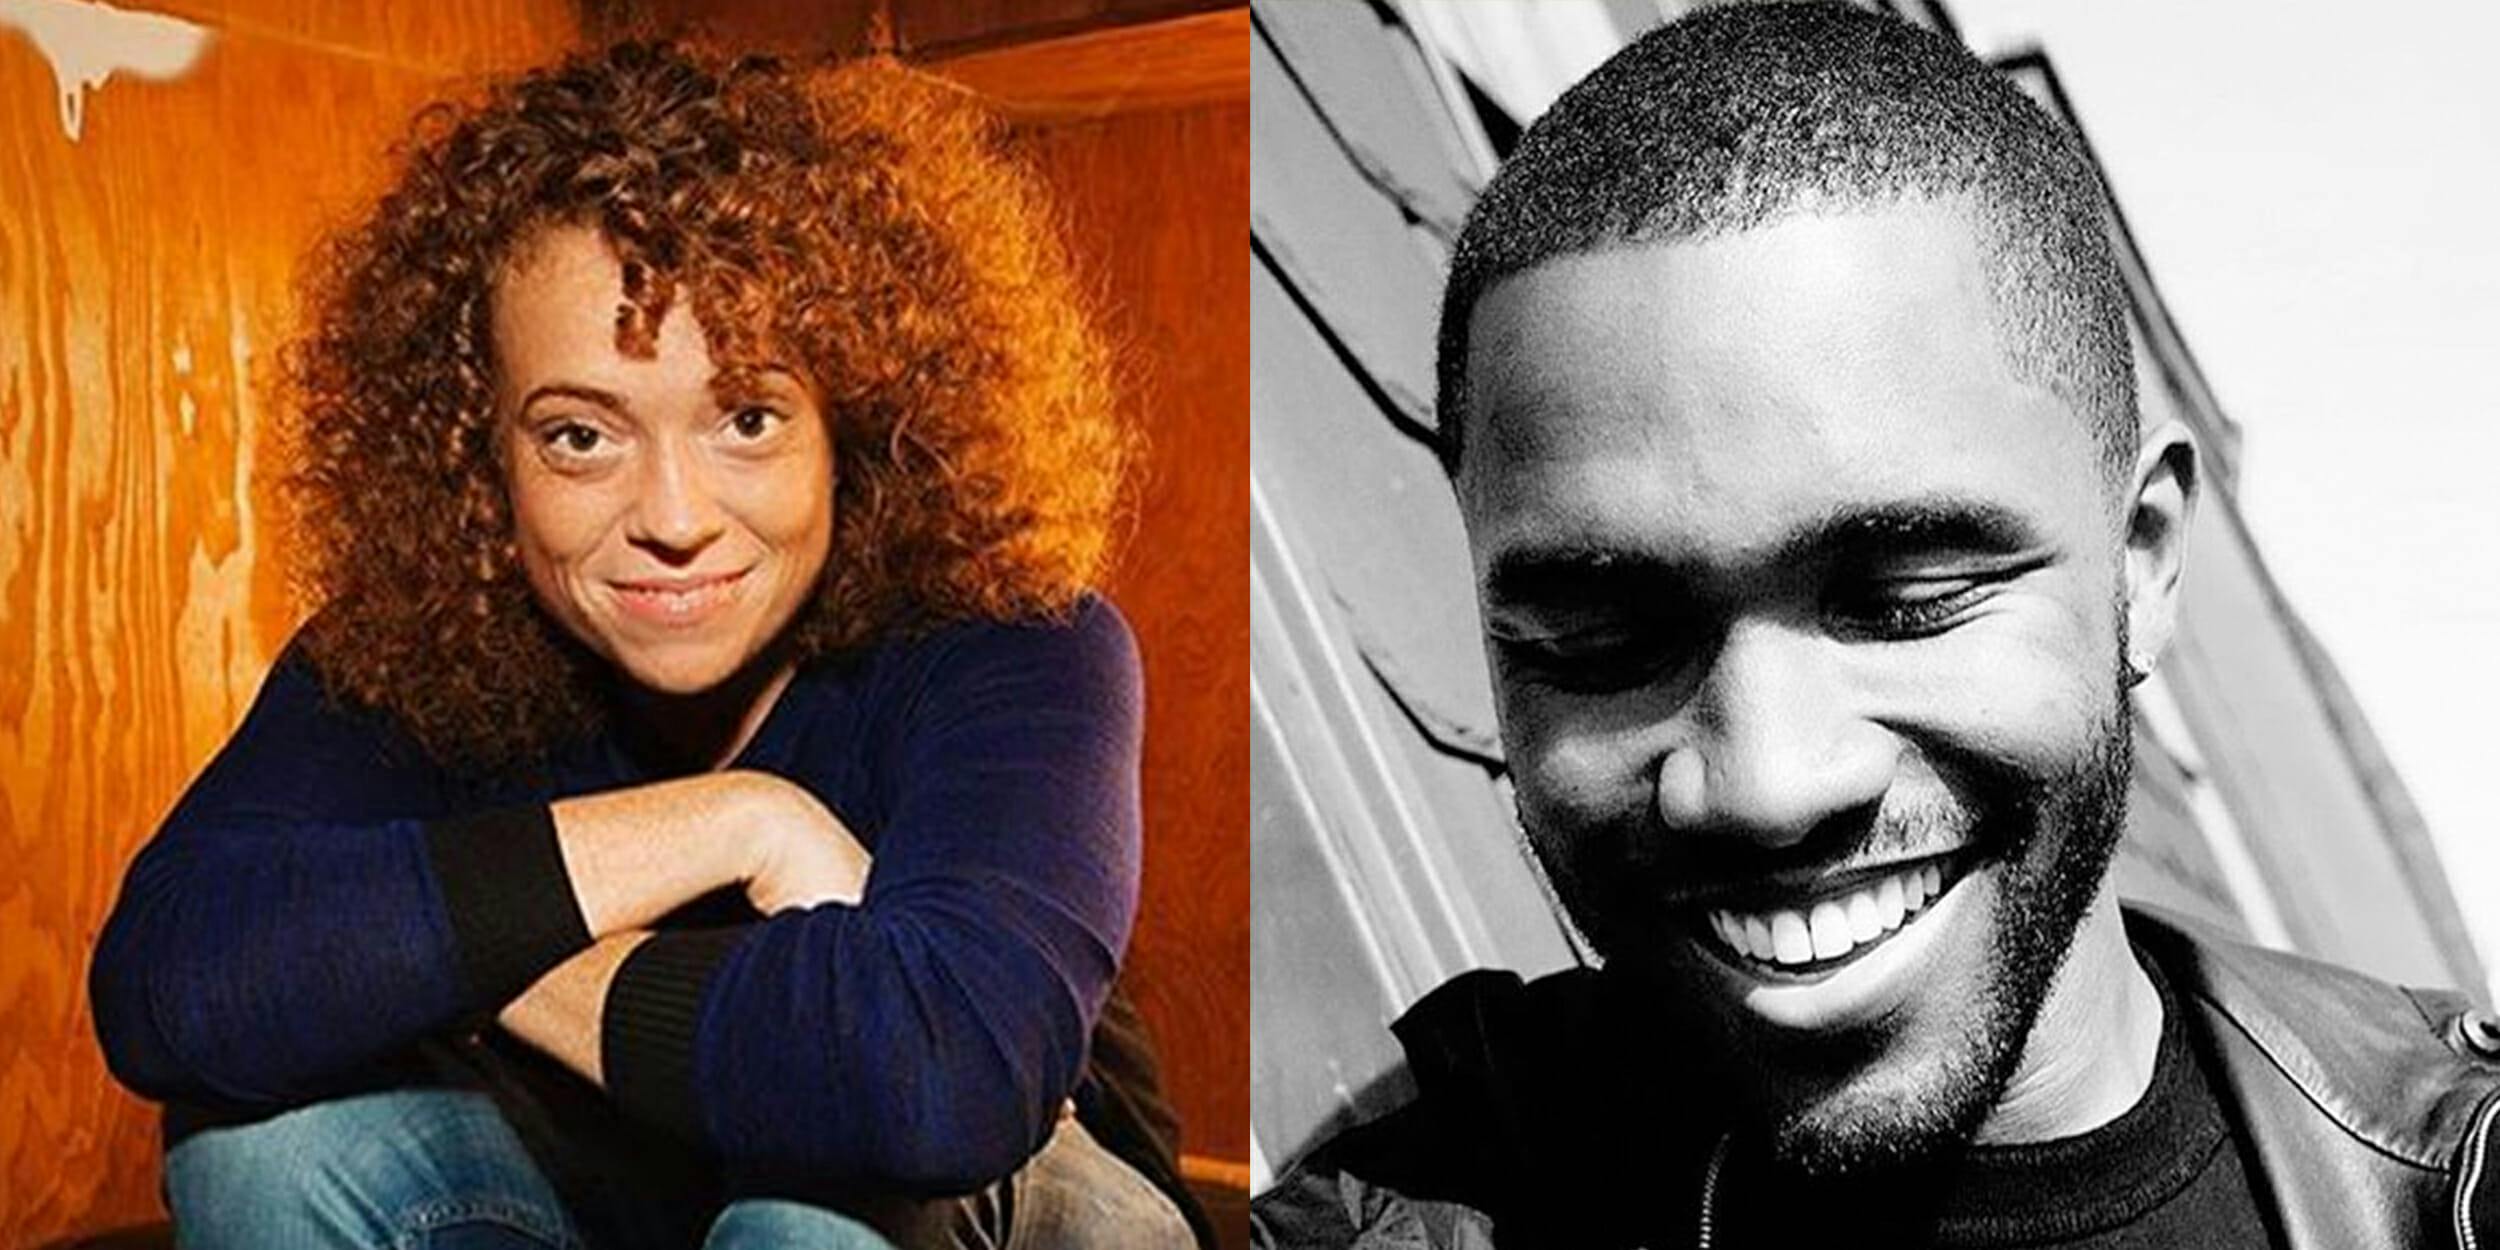 Michelle Wolf and Frank Ocean